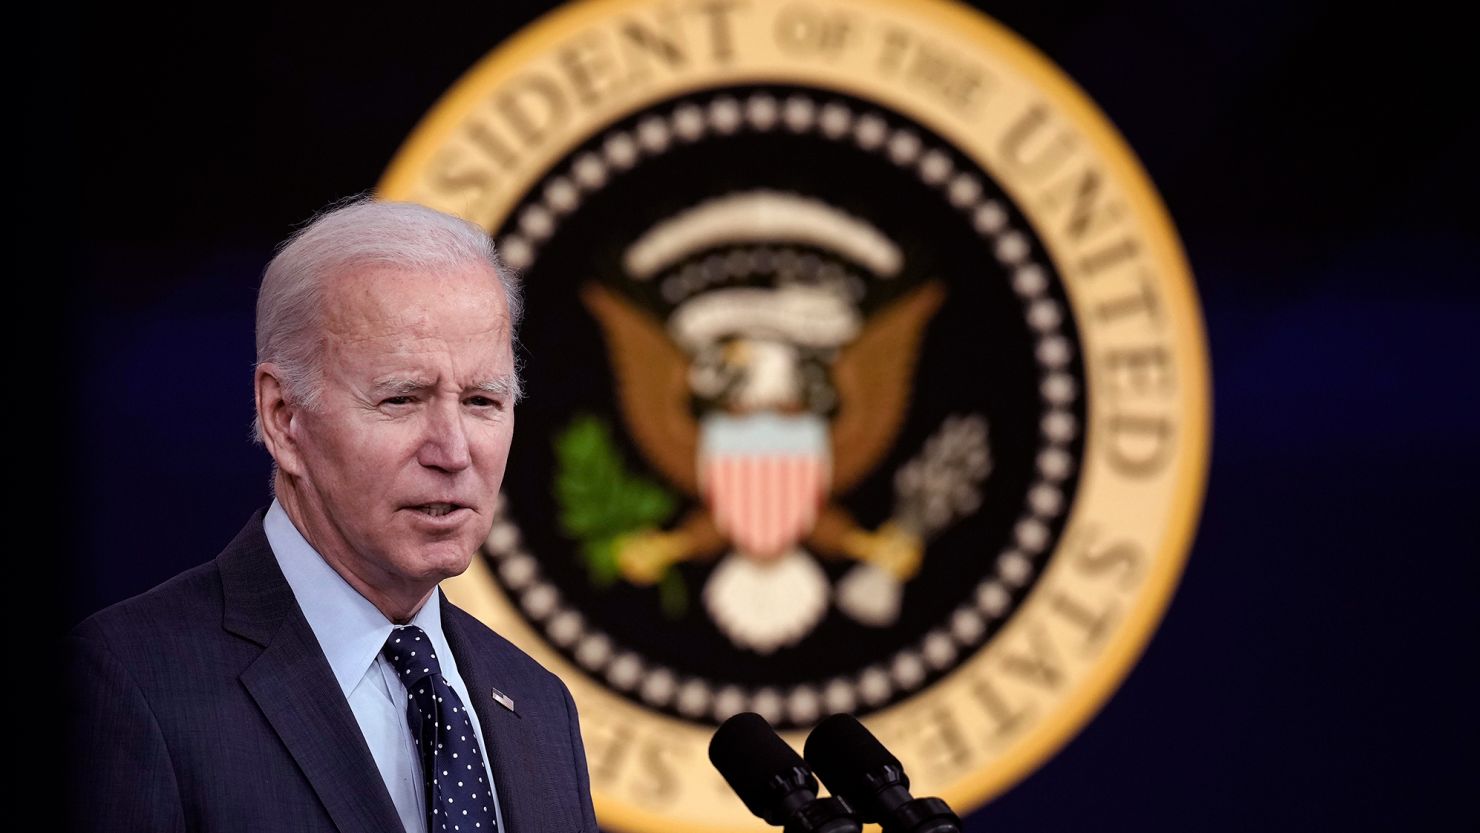 President Joe Biden says his budget will reduce deficits by nearly $3 trillion over a decade.